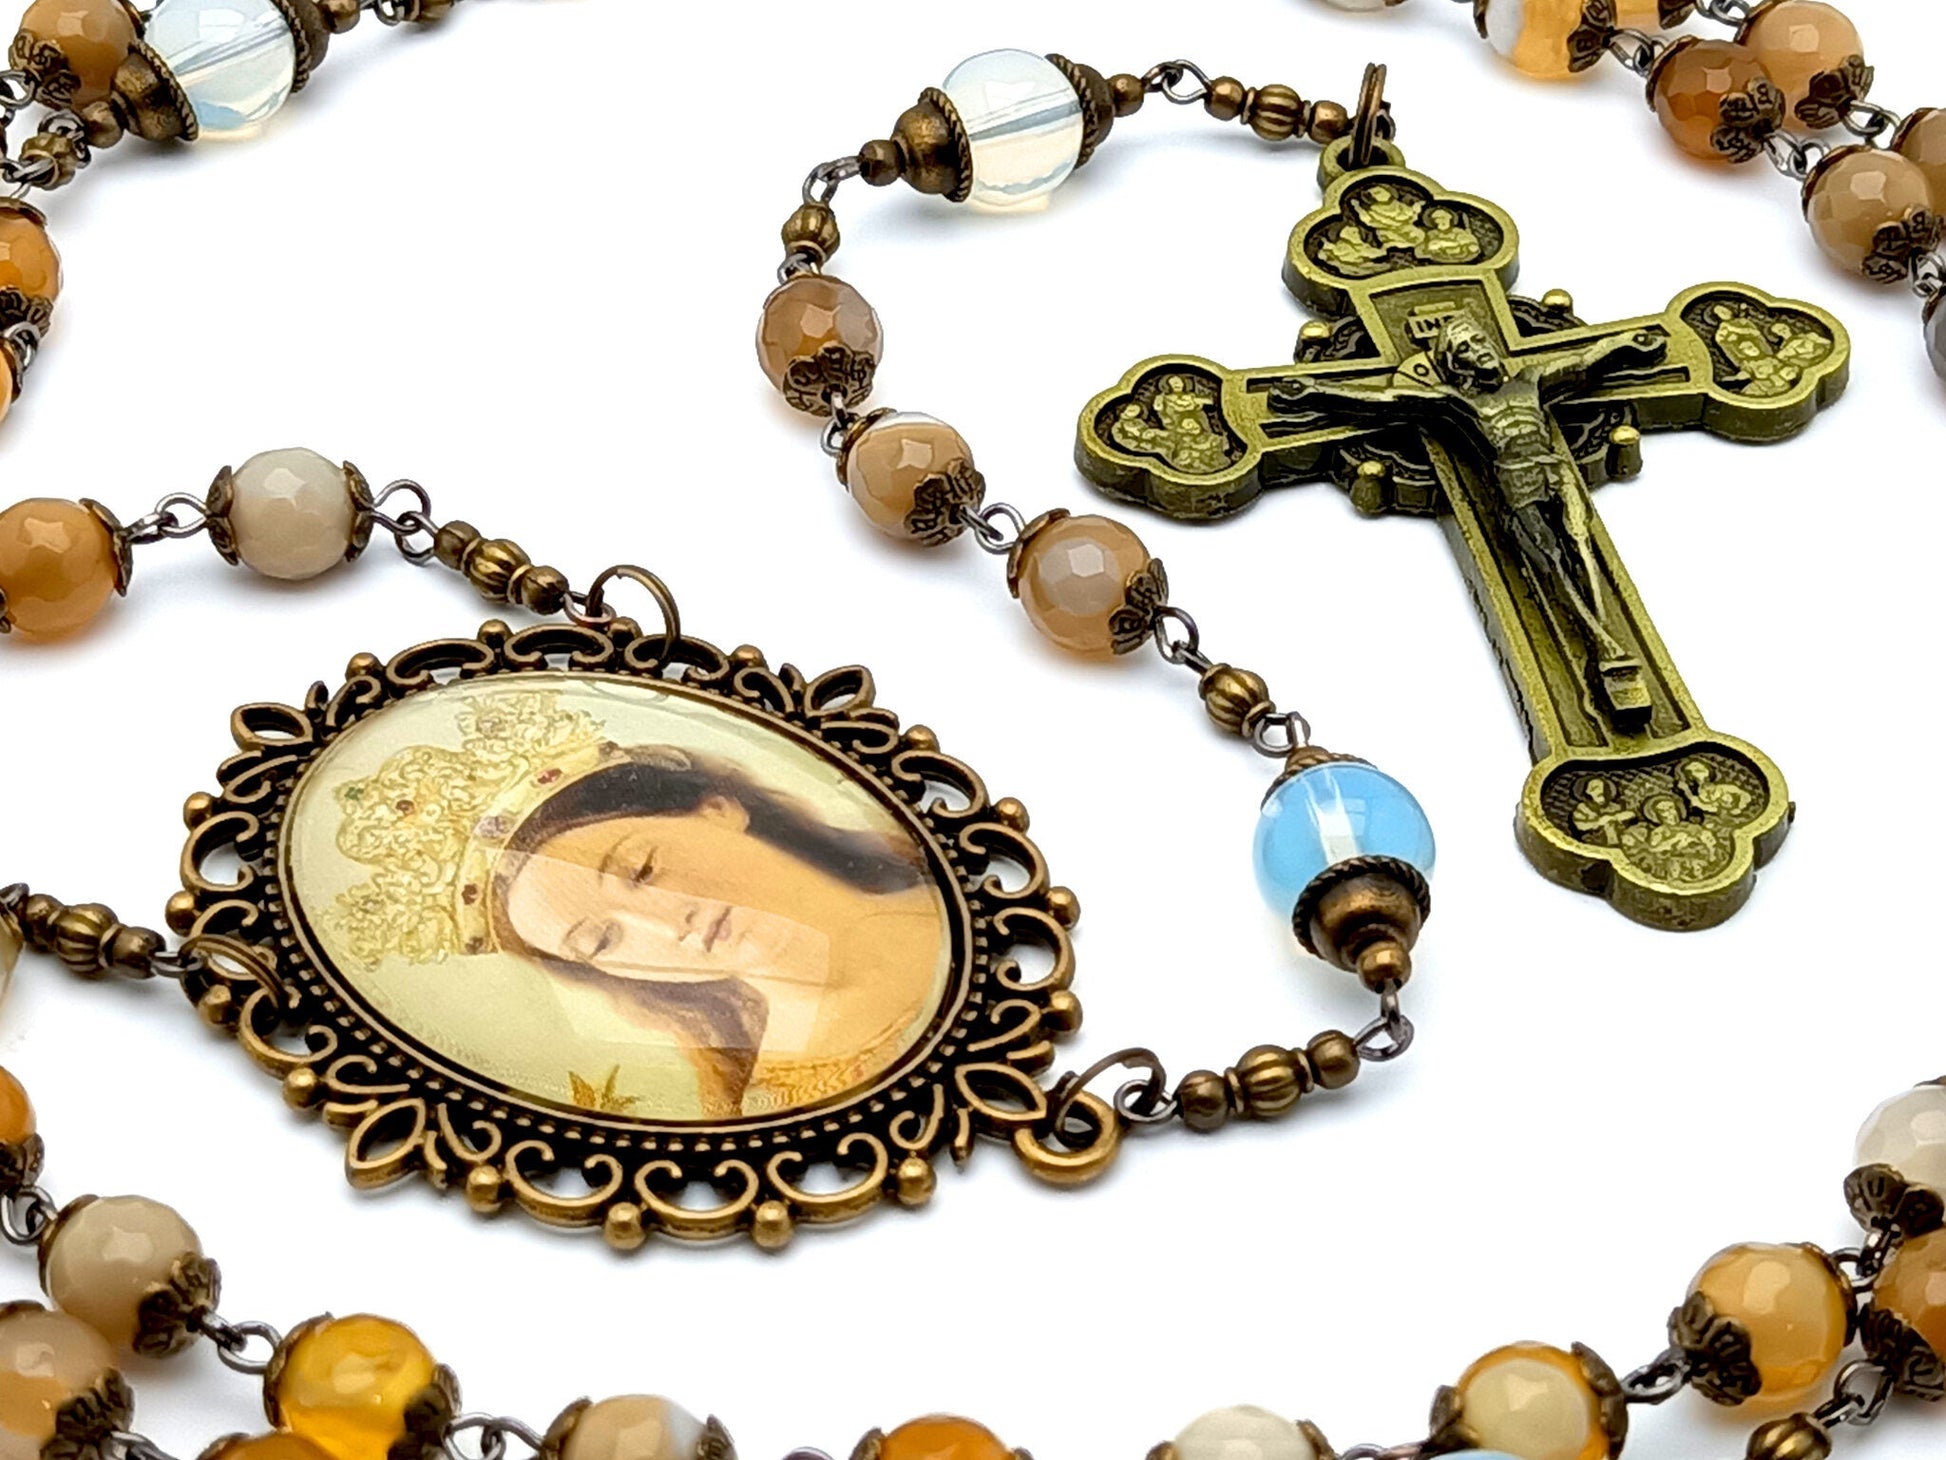 Our Lady of Guadalupe Brass Picture Center Medal Brass Crucifix for rosary  making.